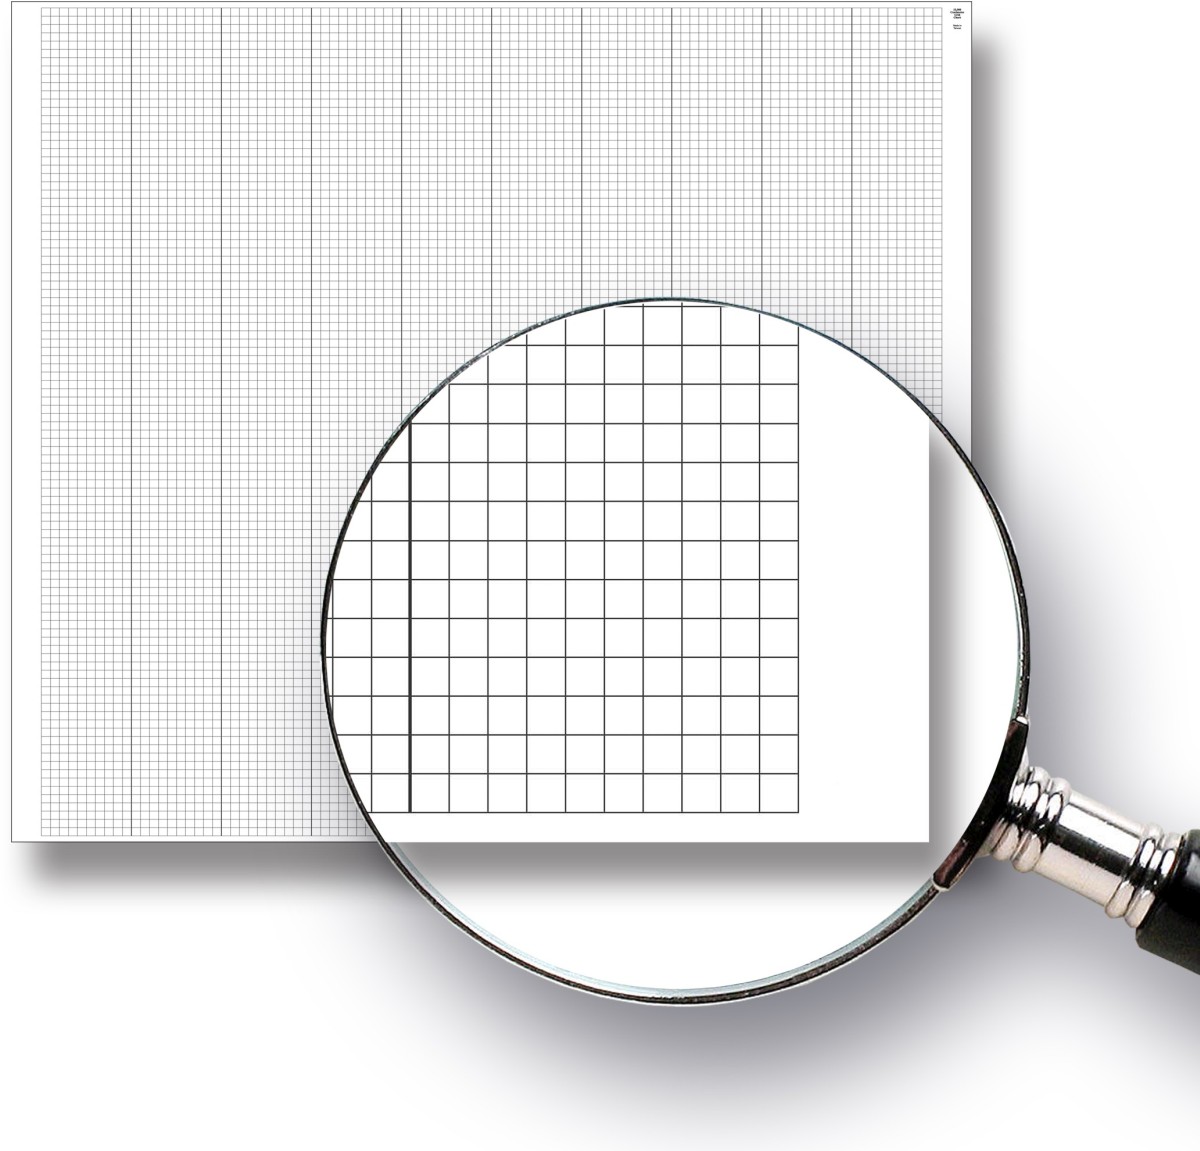 Graph Paper Grid Lines Full Page 1 cm with 19 x, Made By Teachers